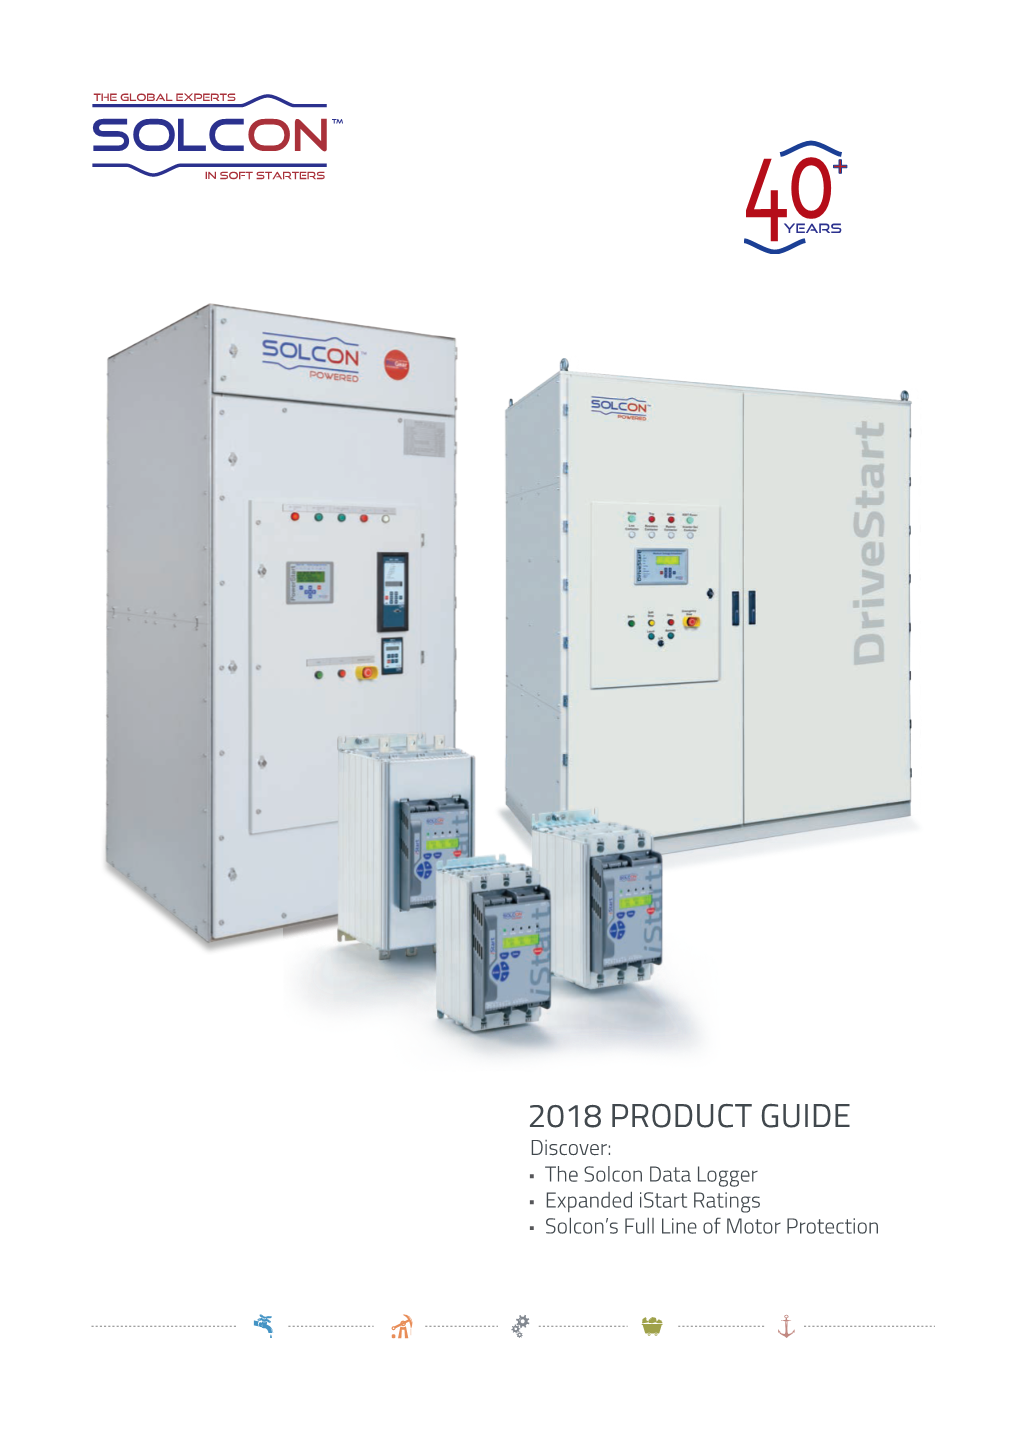 2018 PRODUCT GUIDE Discover: the Solcon Data Logger Expanded Istart Ratings Solcon’S Full Line of Motor Protection